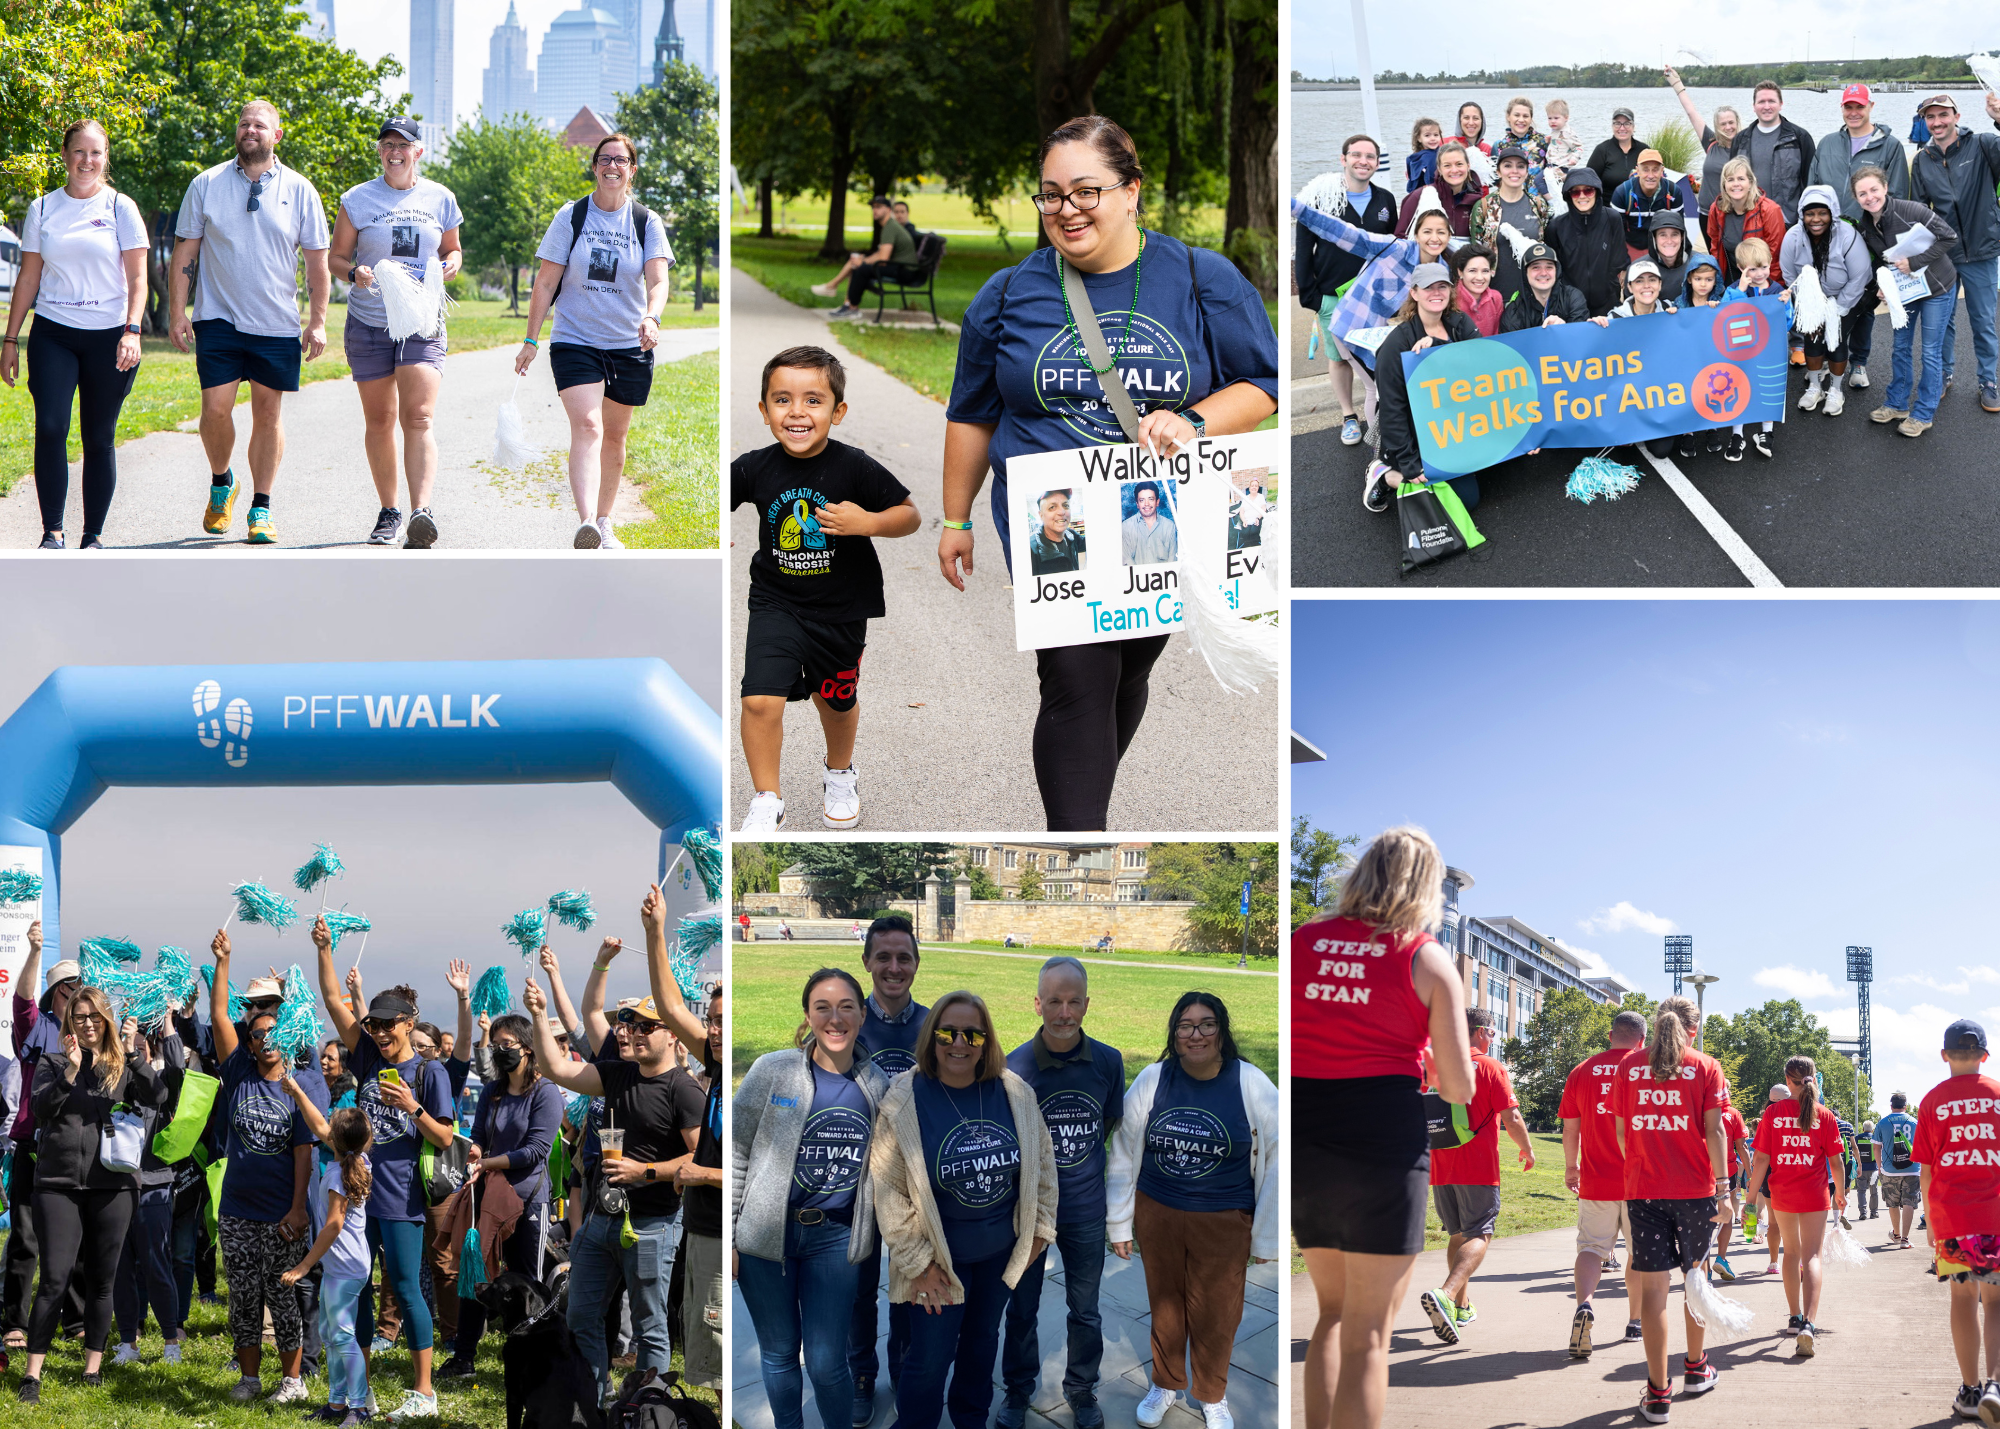 Images from the PFF Walks